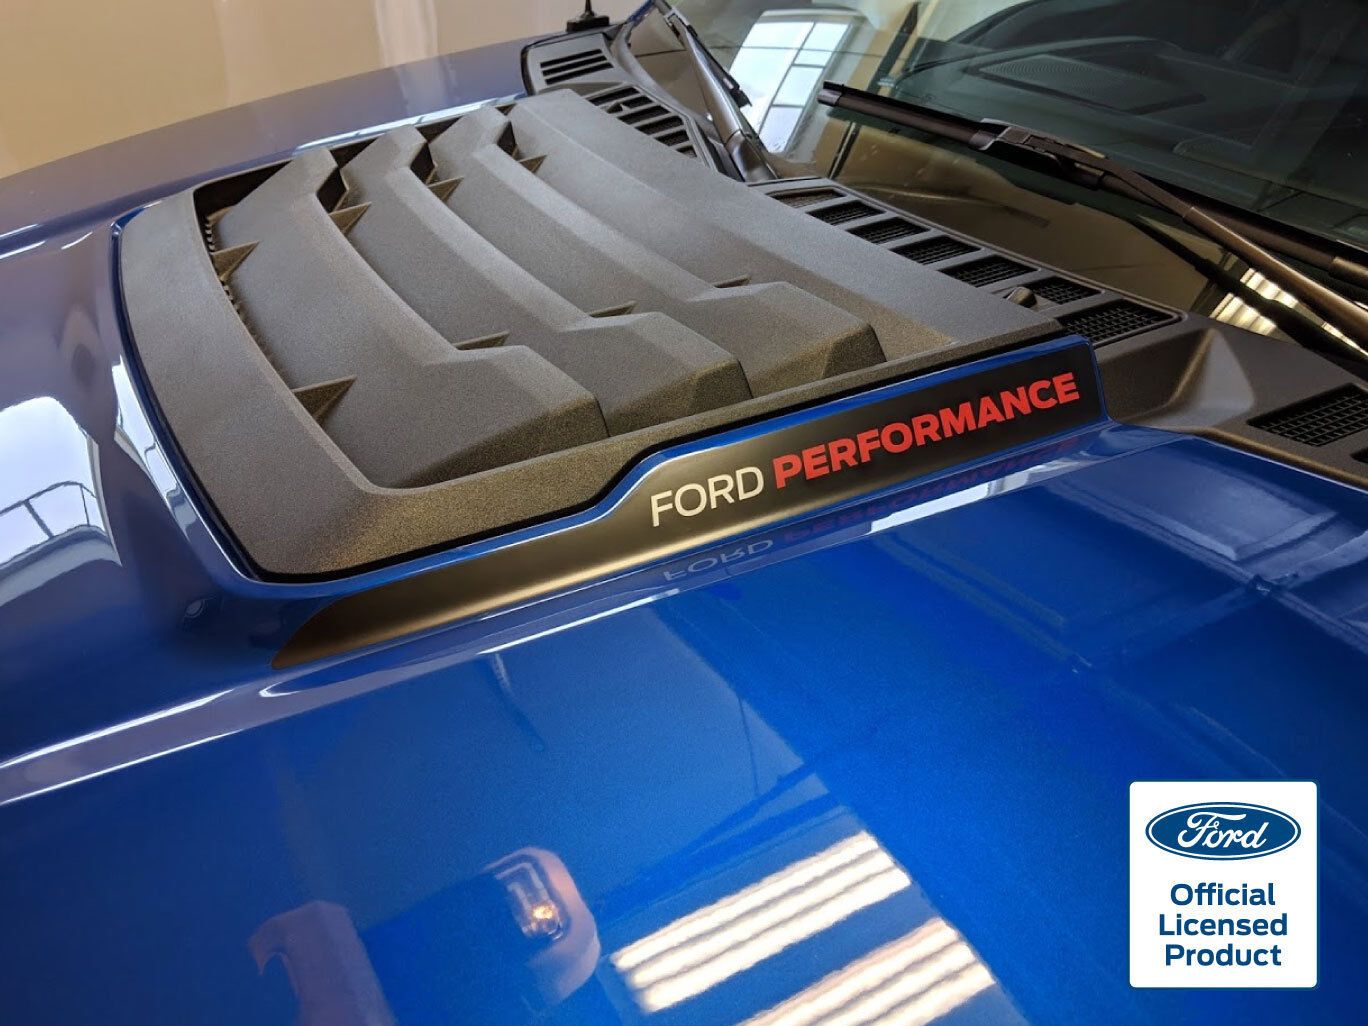 2018  Ford Raptor Svt F-150 Hood Cowl Decals With Ford Performance Vinyl Sticker